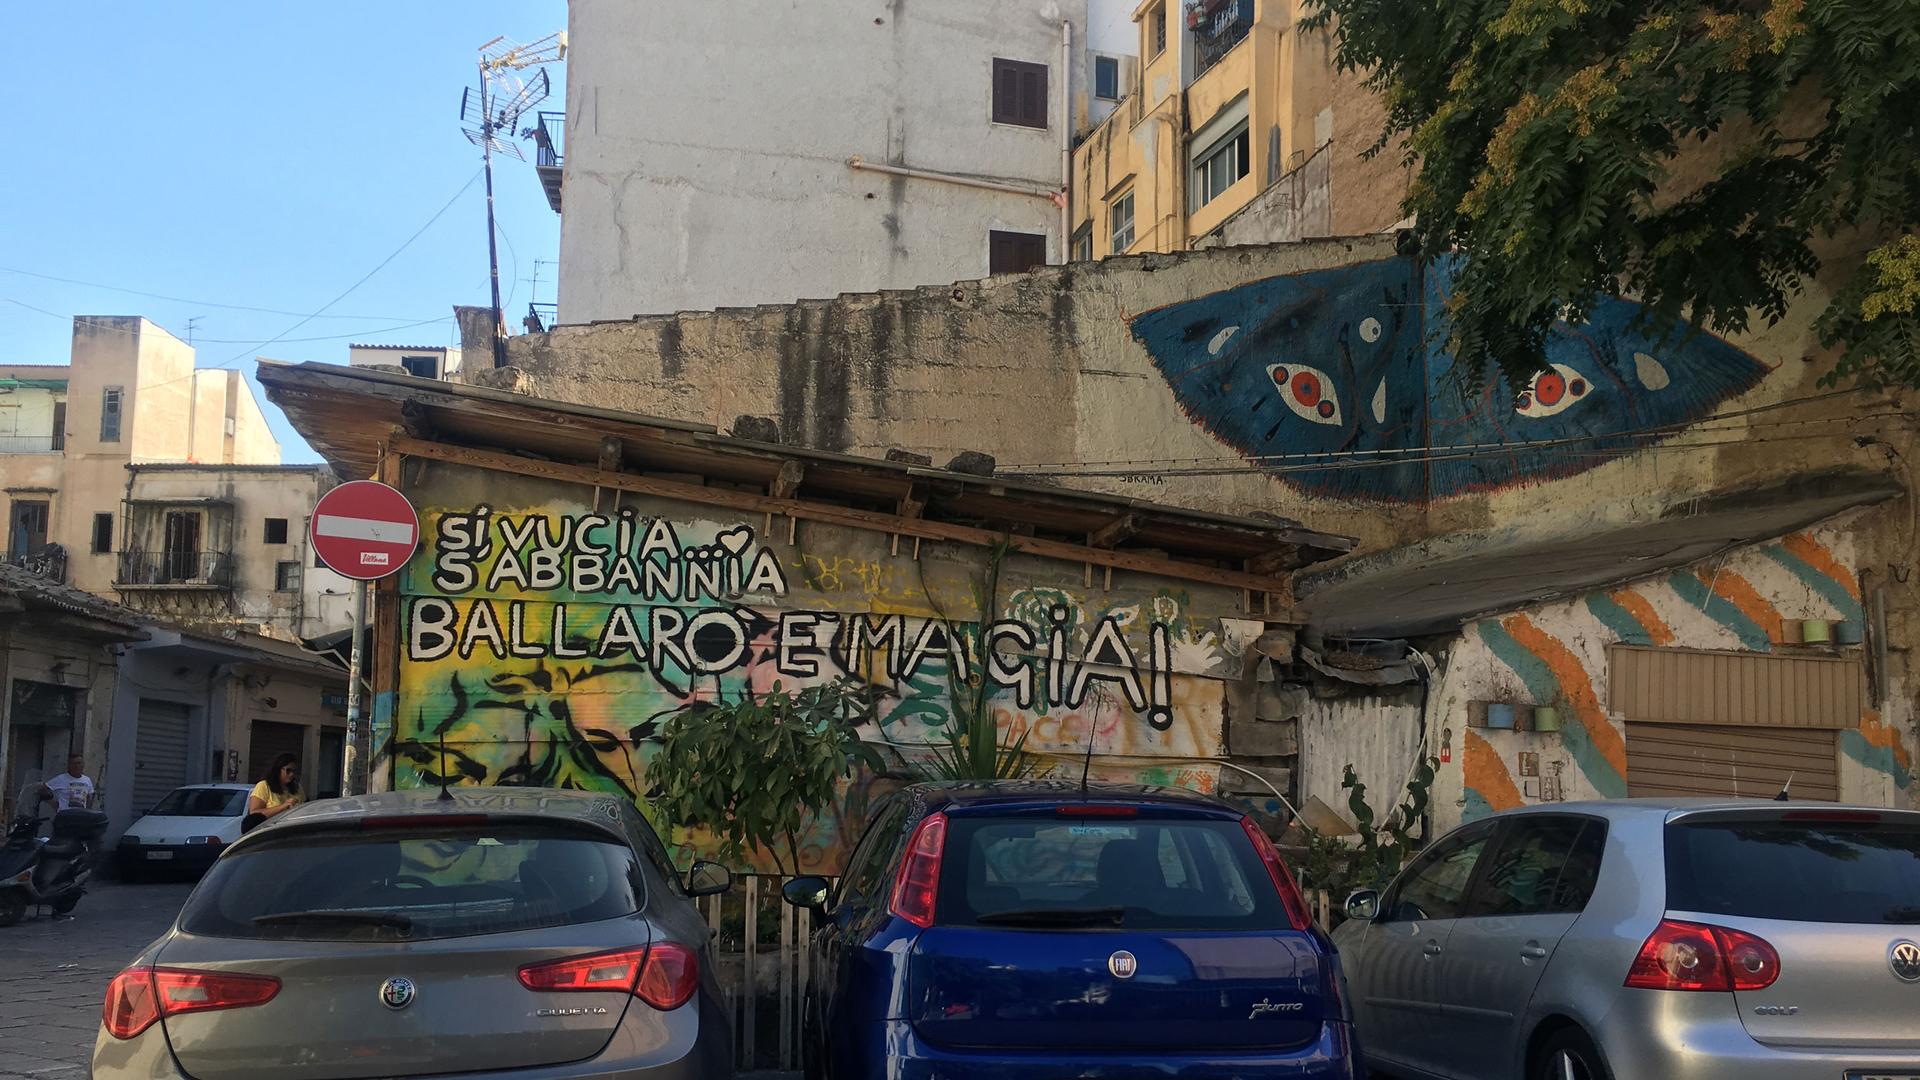 three cars are parked in front of a wall with graffiti